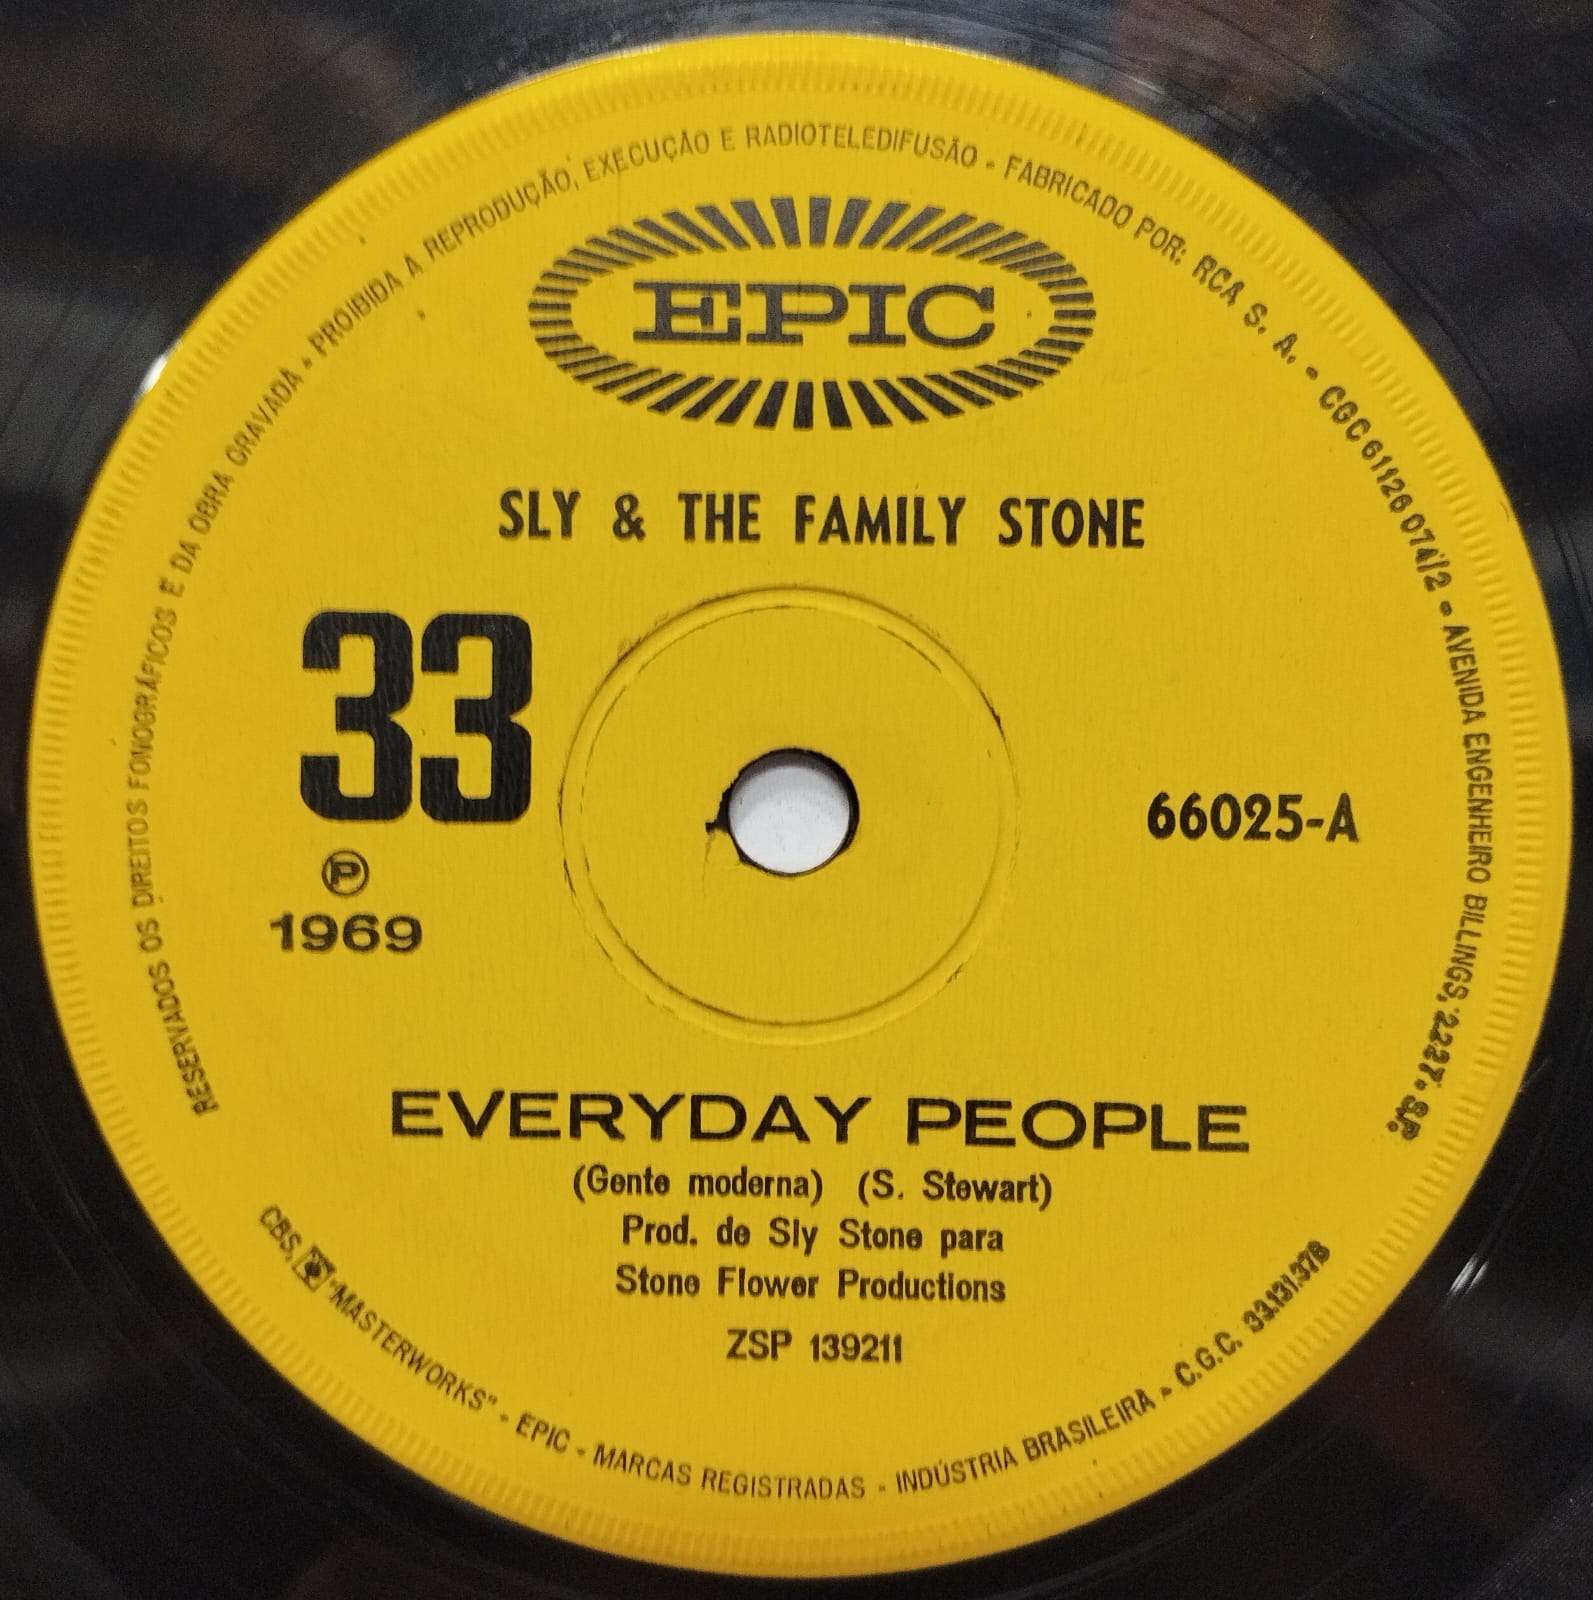 Sly & The Family Stone - Everyday People / Sing A Simple Song (Compacto)